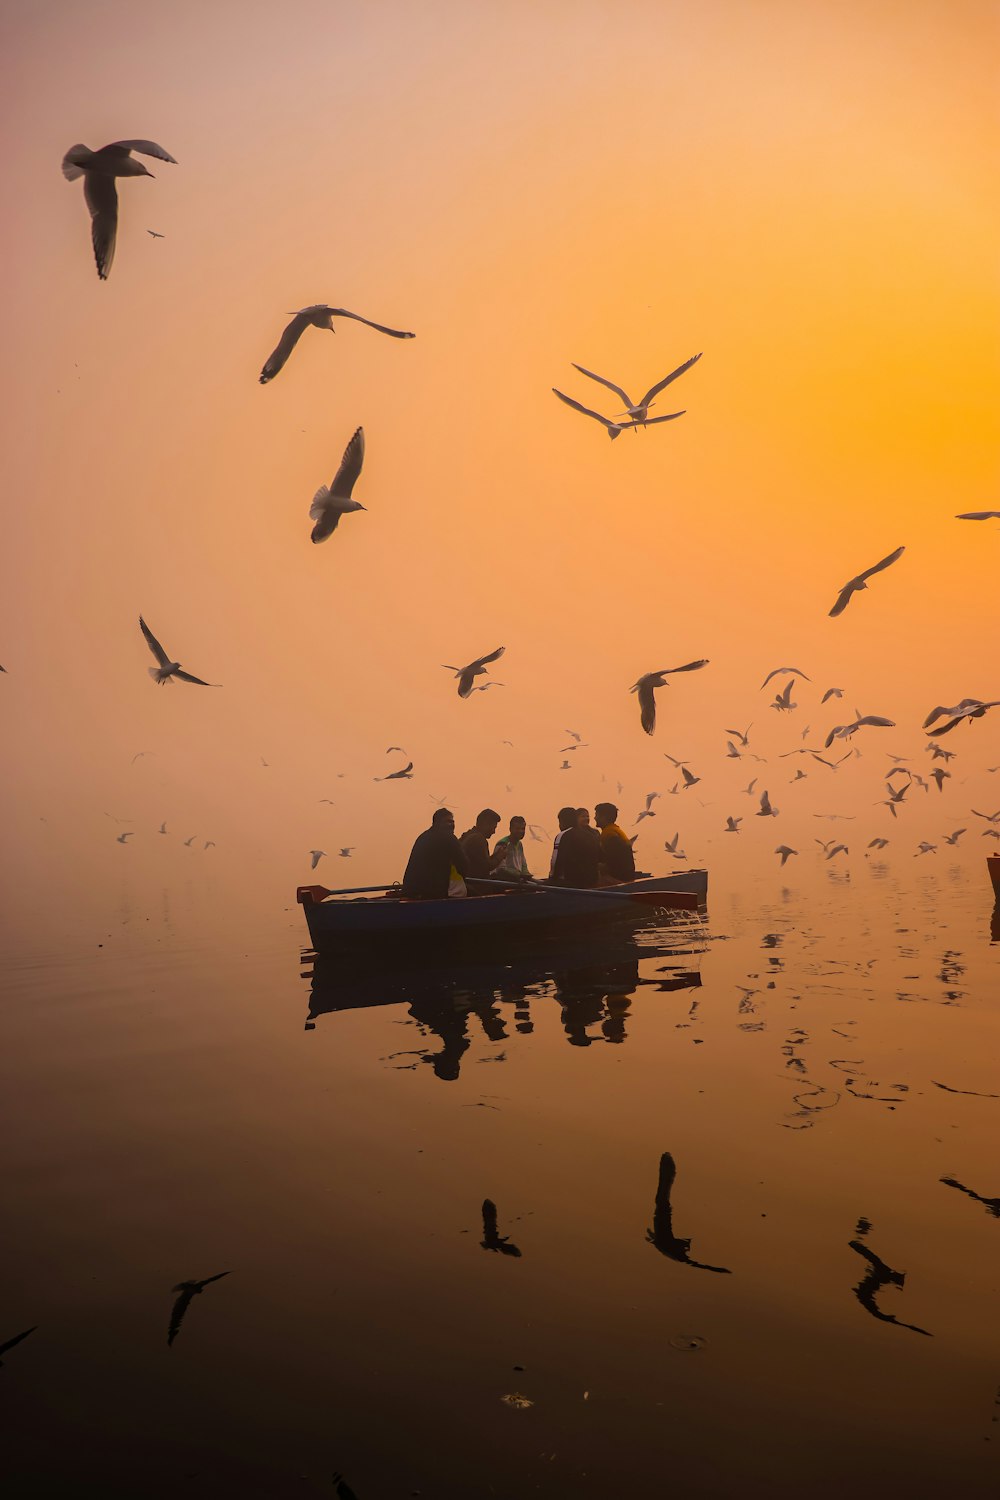 a flock of birds flying over a boat on a body of water